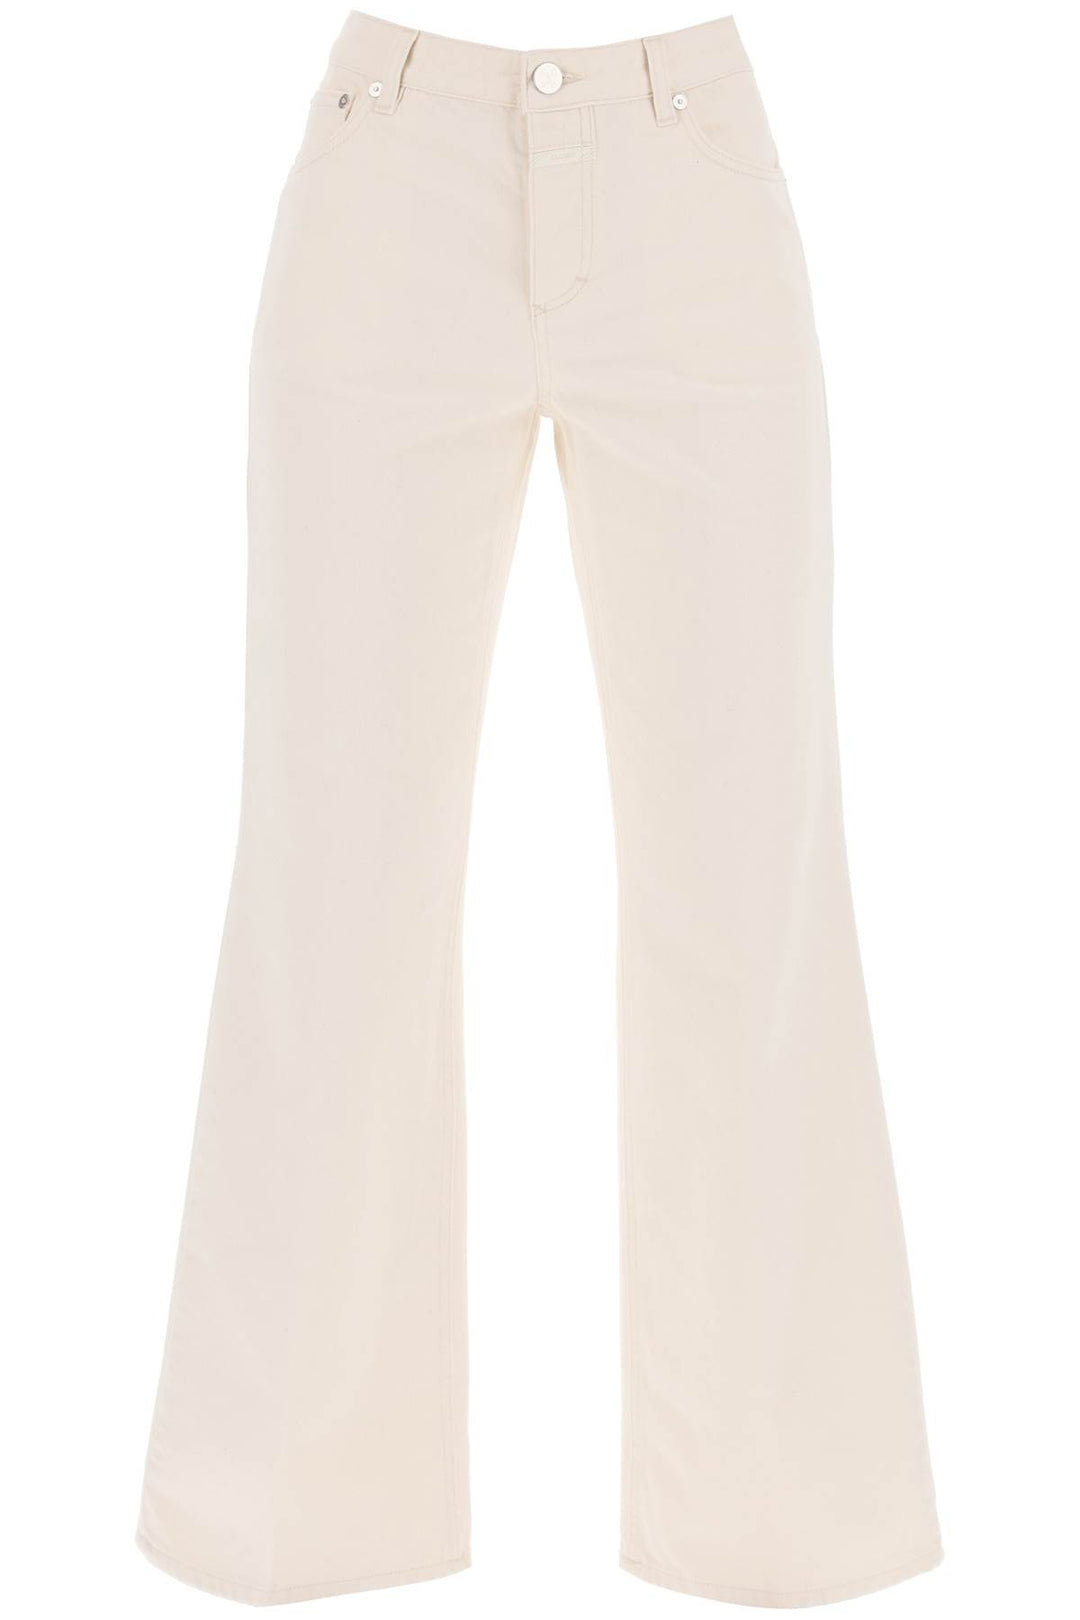 Closed Low Waist Flared Jeans By Gill   Neutro